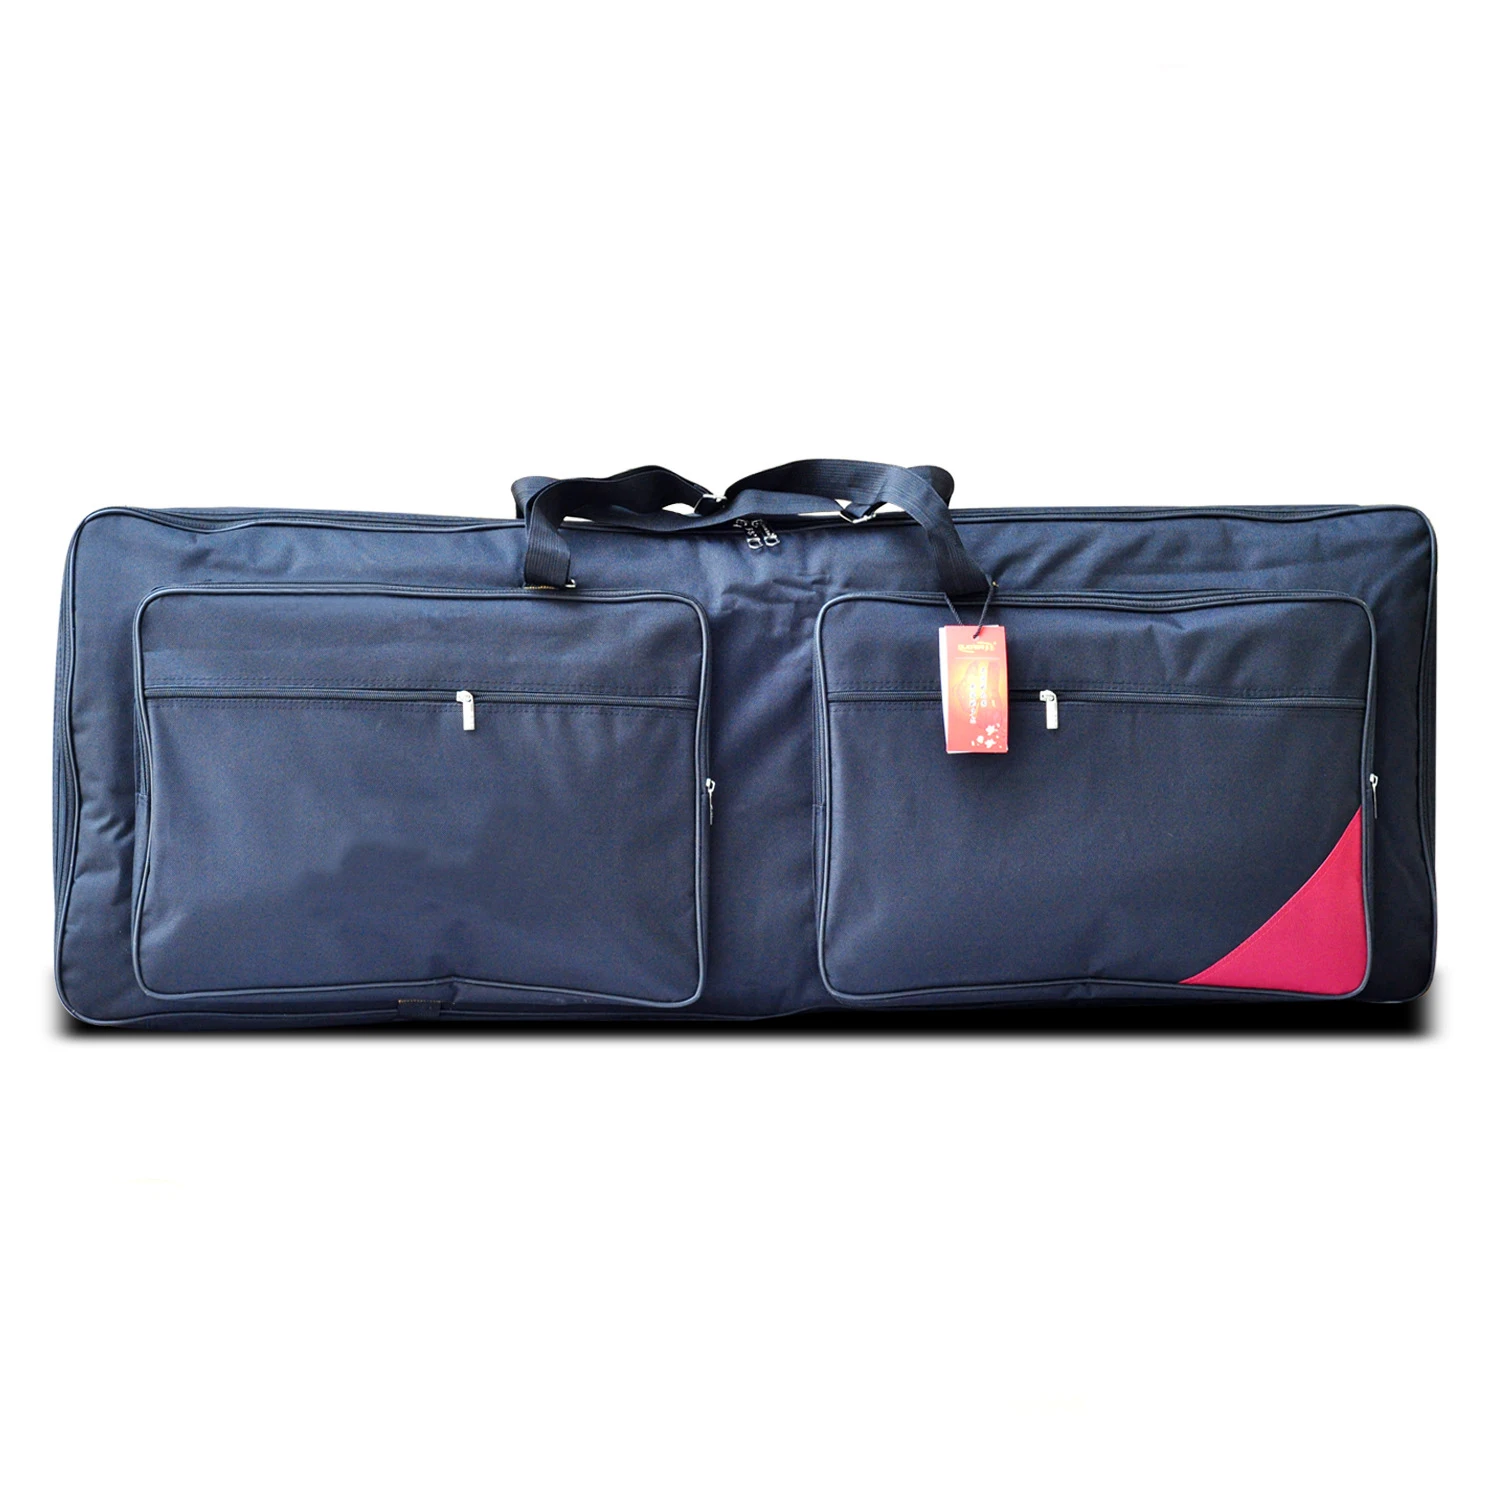 Portable 76 Key Electronic Piano Keyboard Bag Carrying Bag Storage Holder Case 420D Cloth for 76Key Piano Keyboard